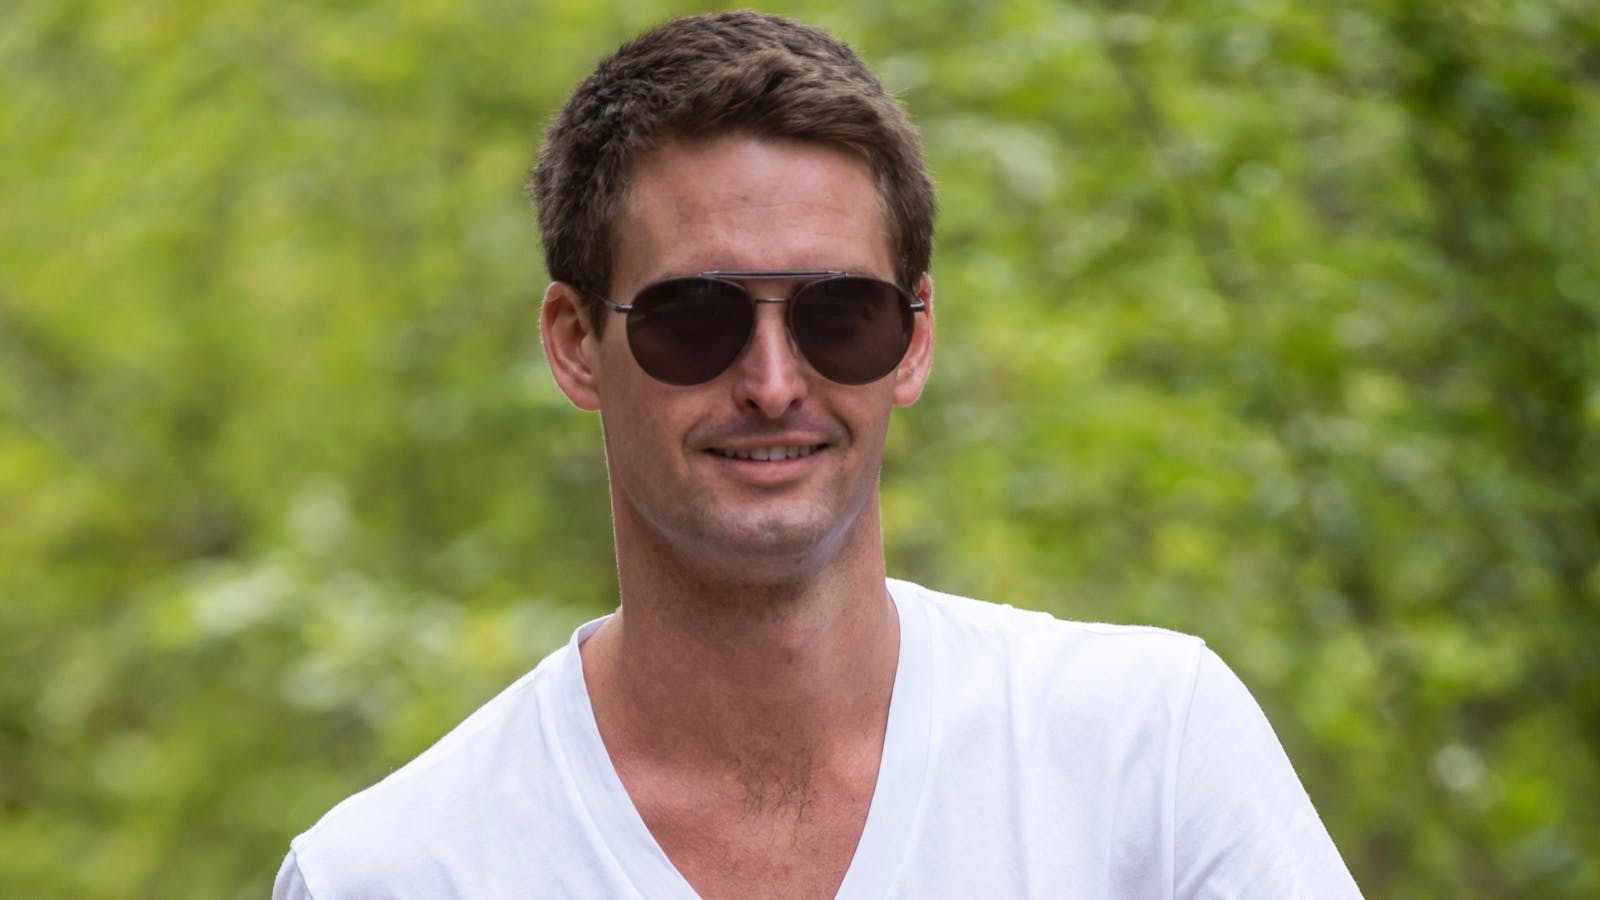 Snap CEO Evan Spiegel. Photo by Bloomberg.